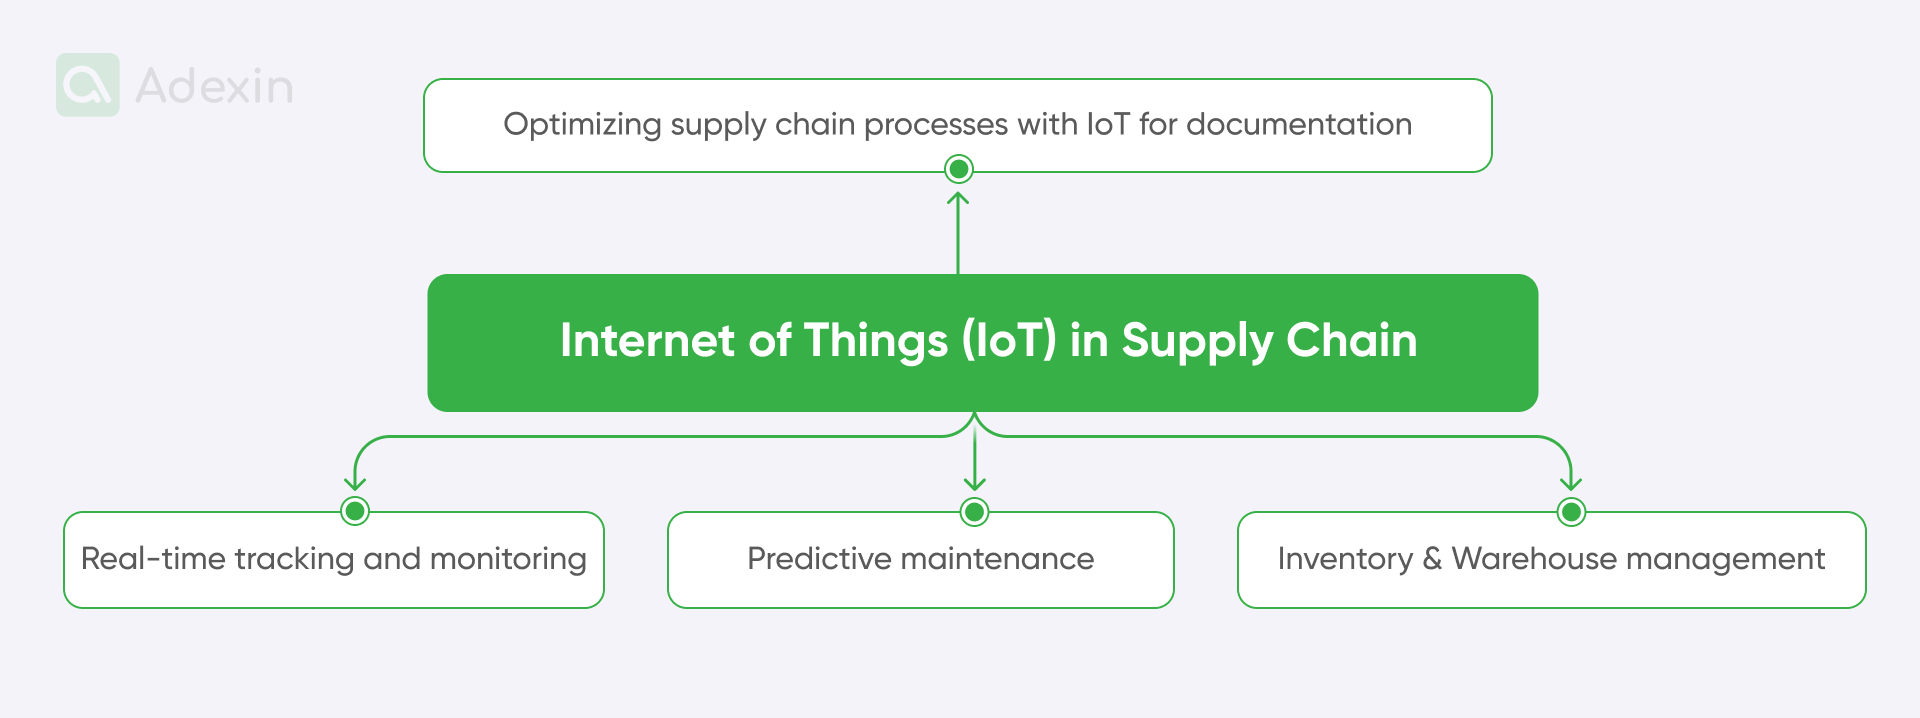 Benefits of using IoT in the supply chain